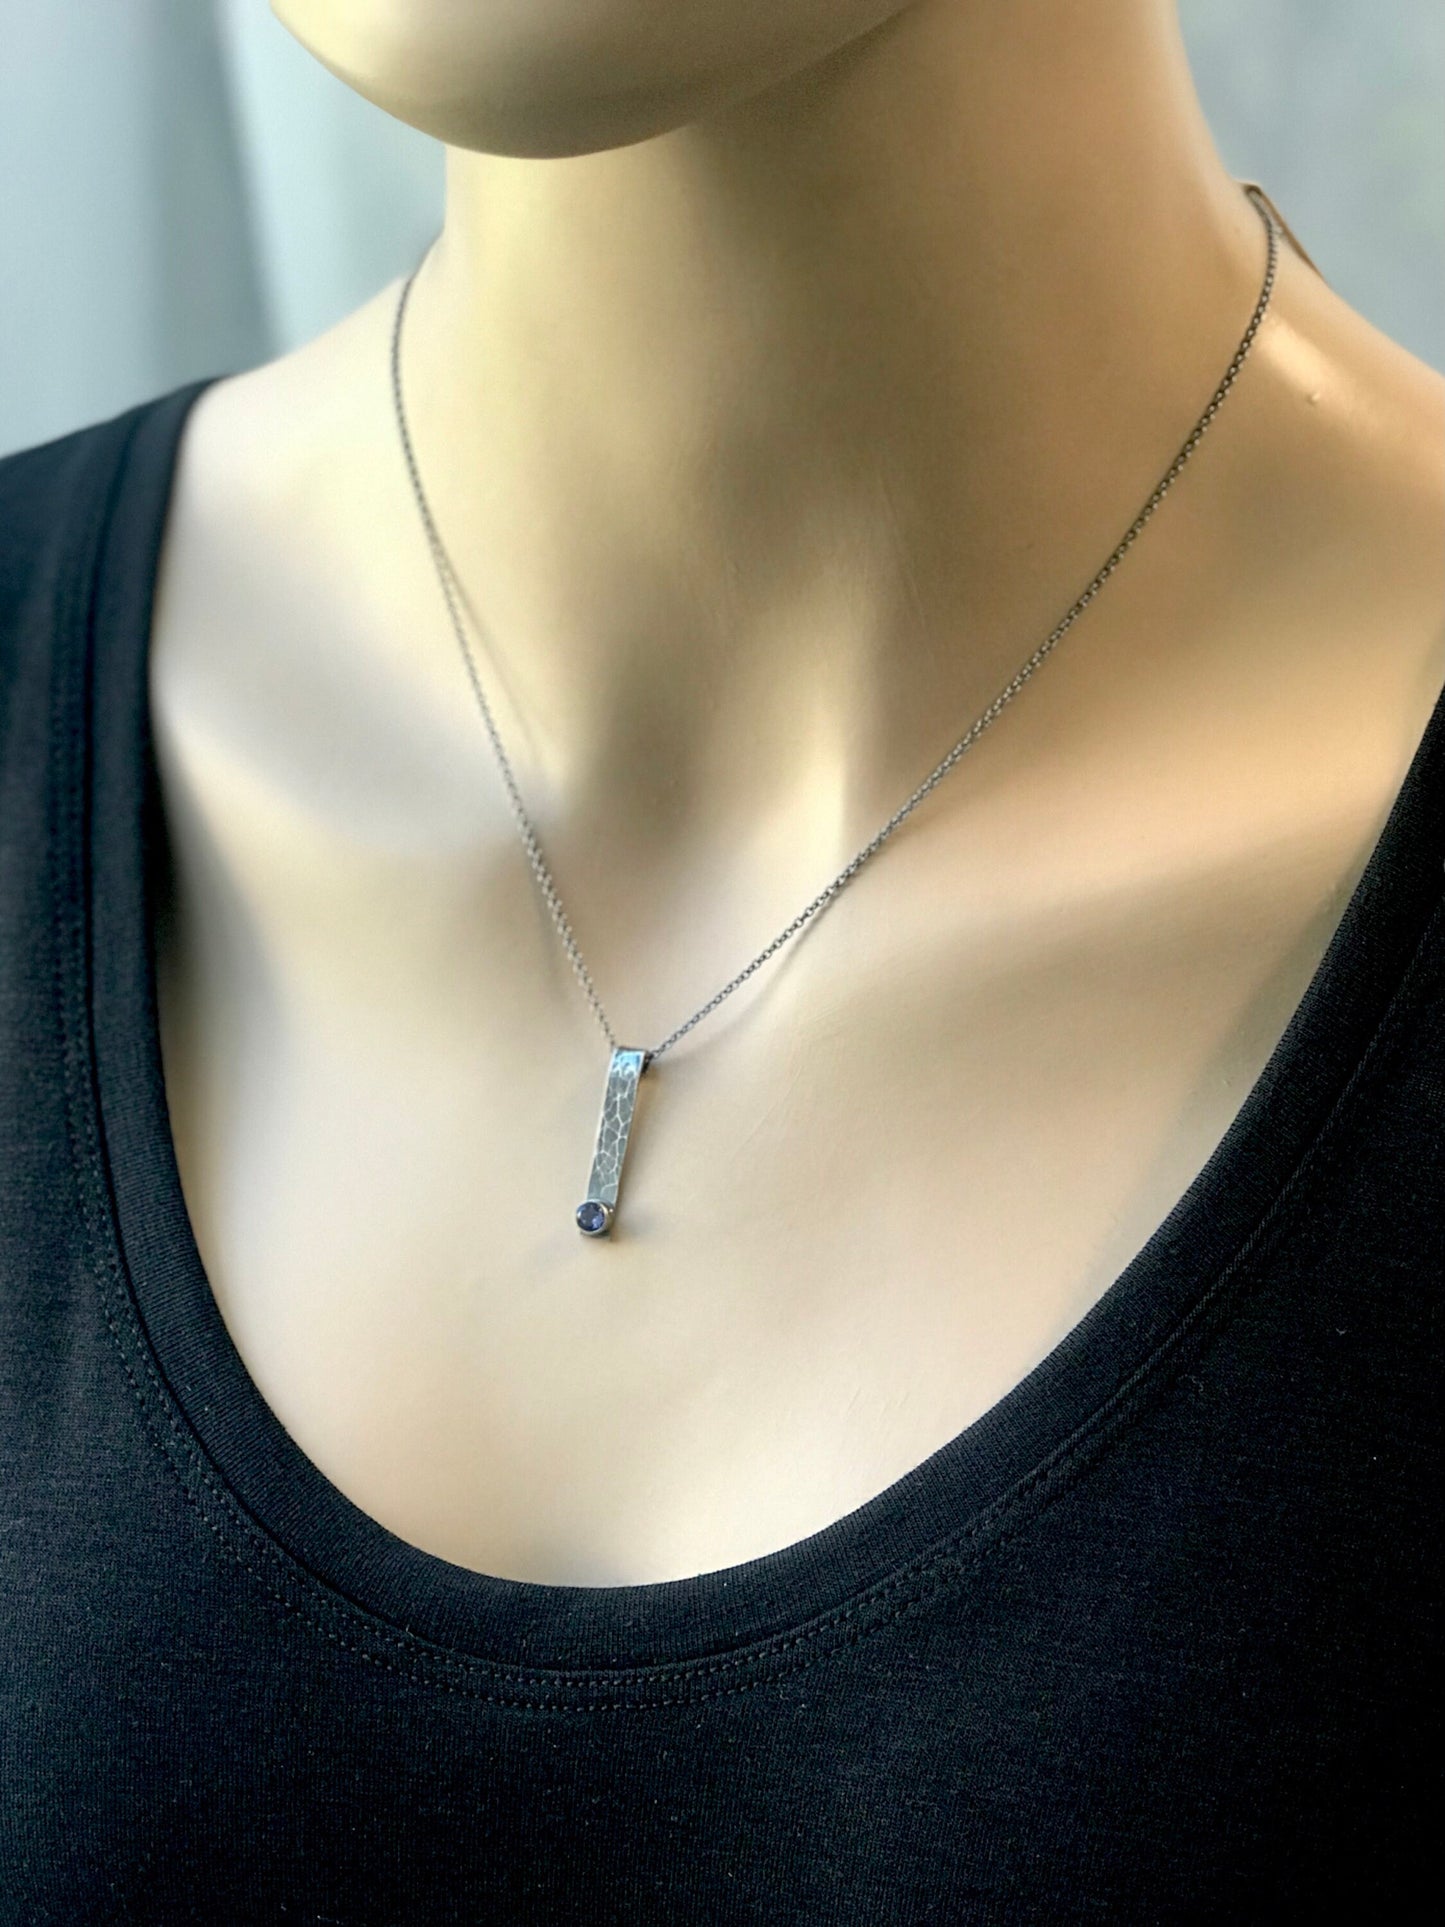 Iolite and Sterling Silver Bar Necklace - Handmade Hammered Sterling Silver Pendant and Genuine Iolite Faceted Gemstone